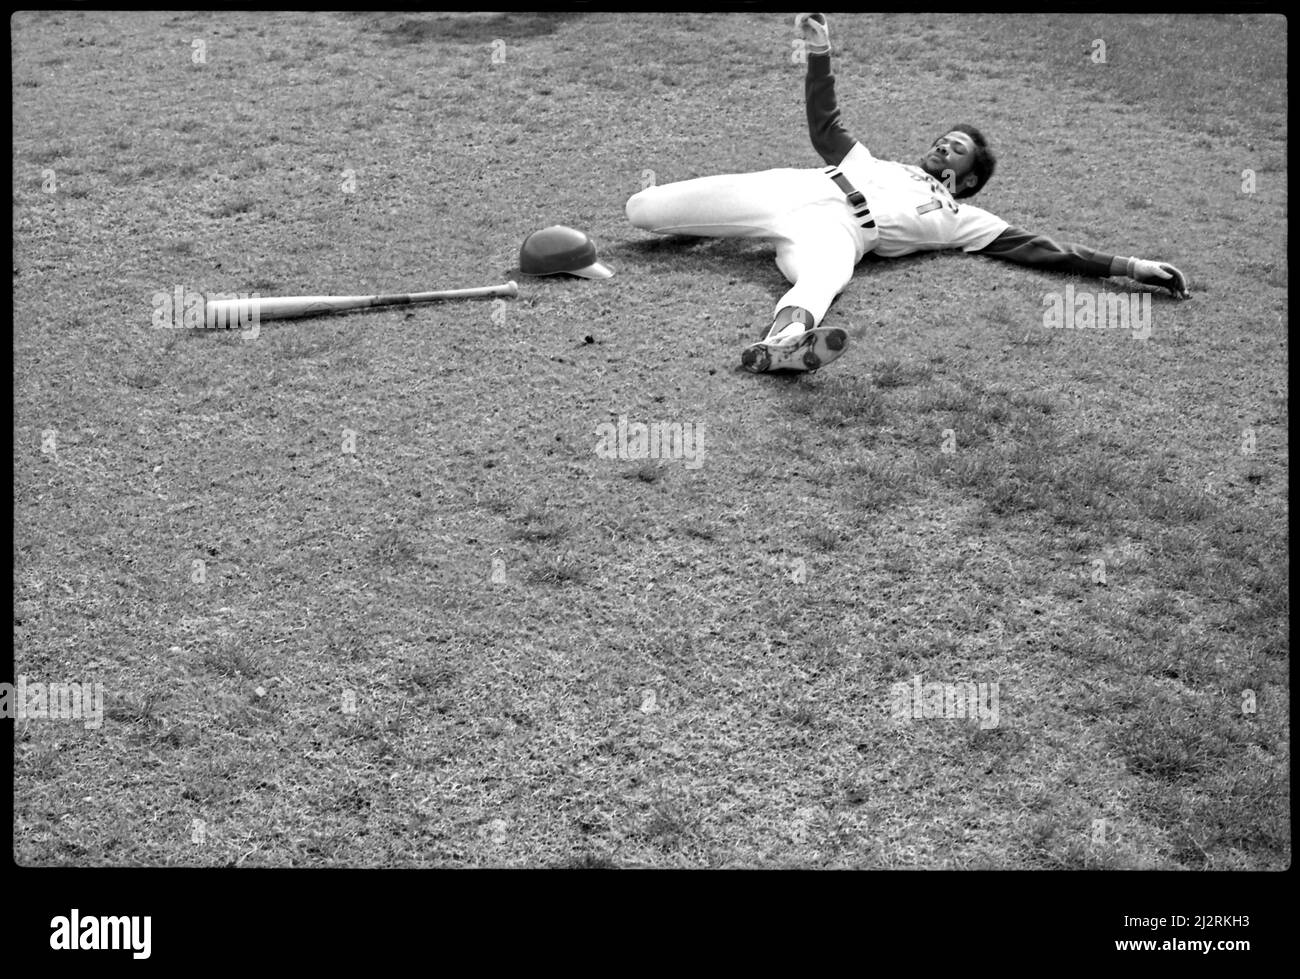 Los Angeles Dodger player Derrel Thomas stretching before a game at Dodger Stadium. Stock Photo